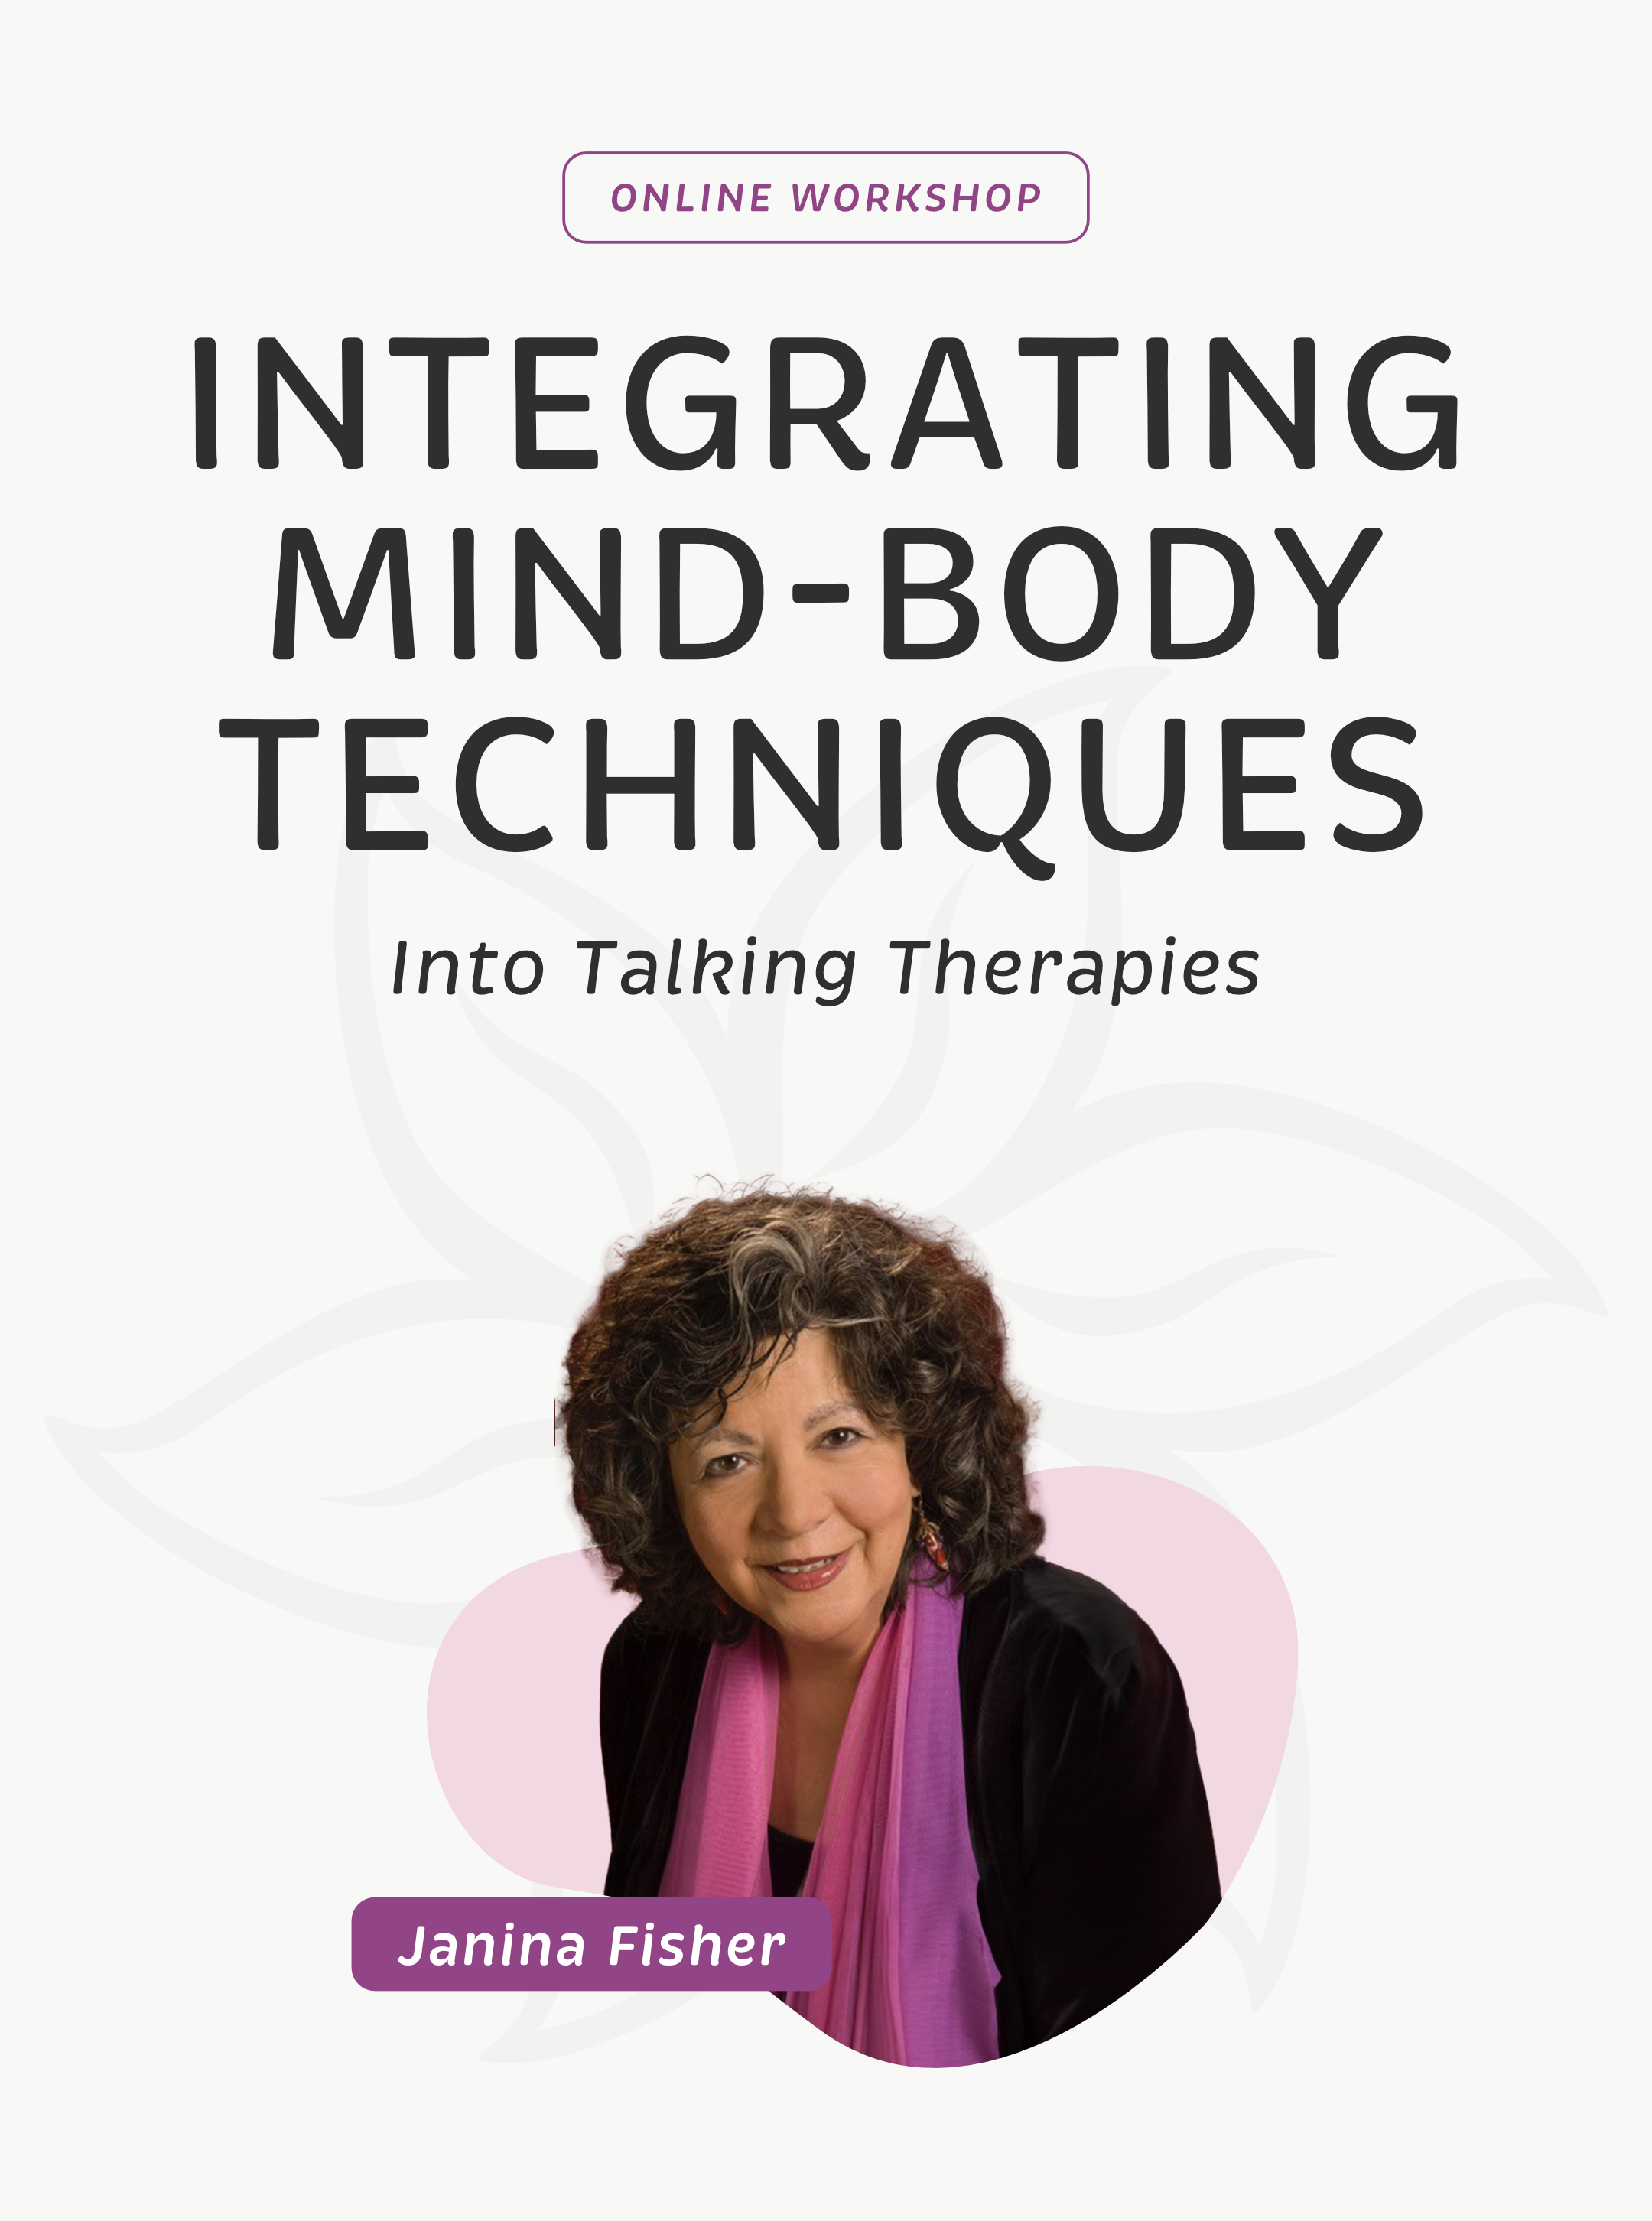 Integrating Mind-Body Techniques into Talking Therapies